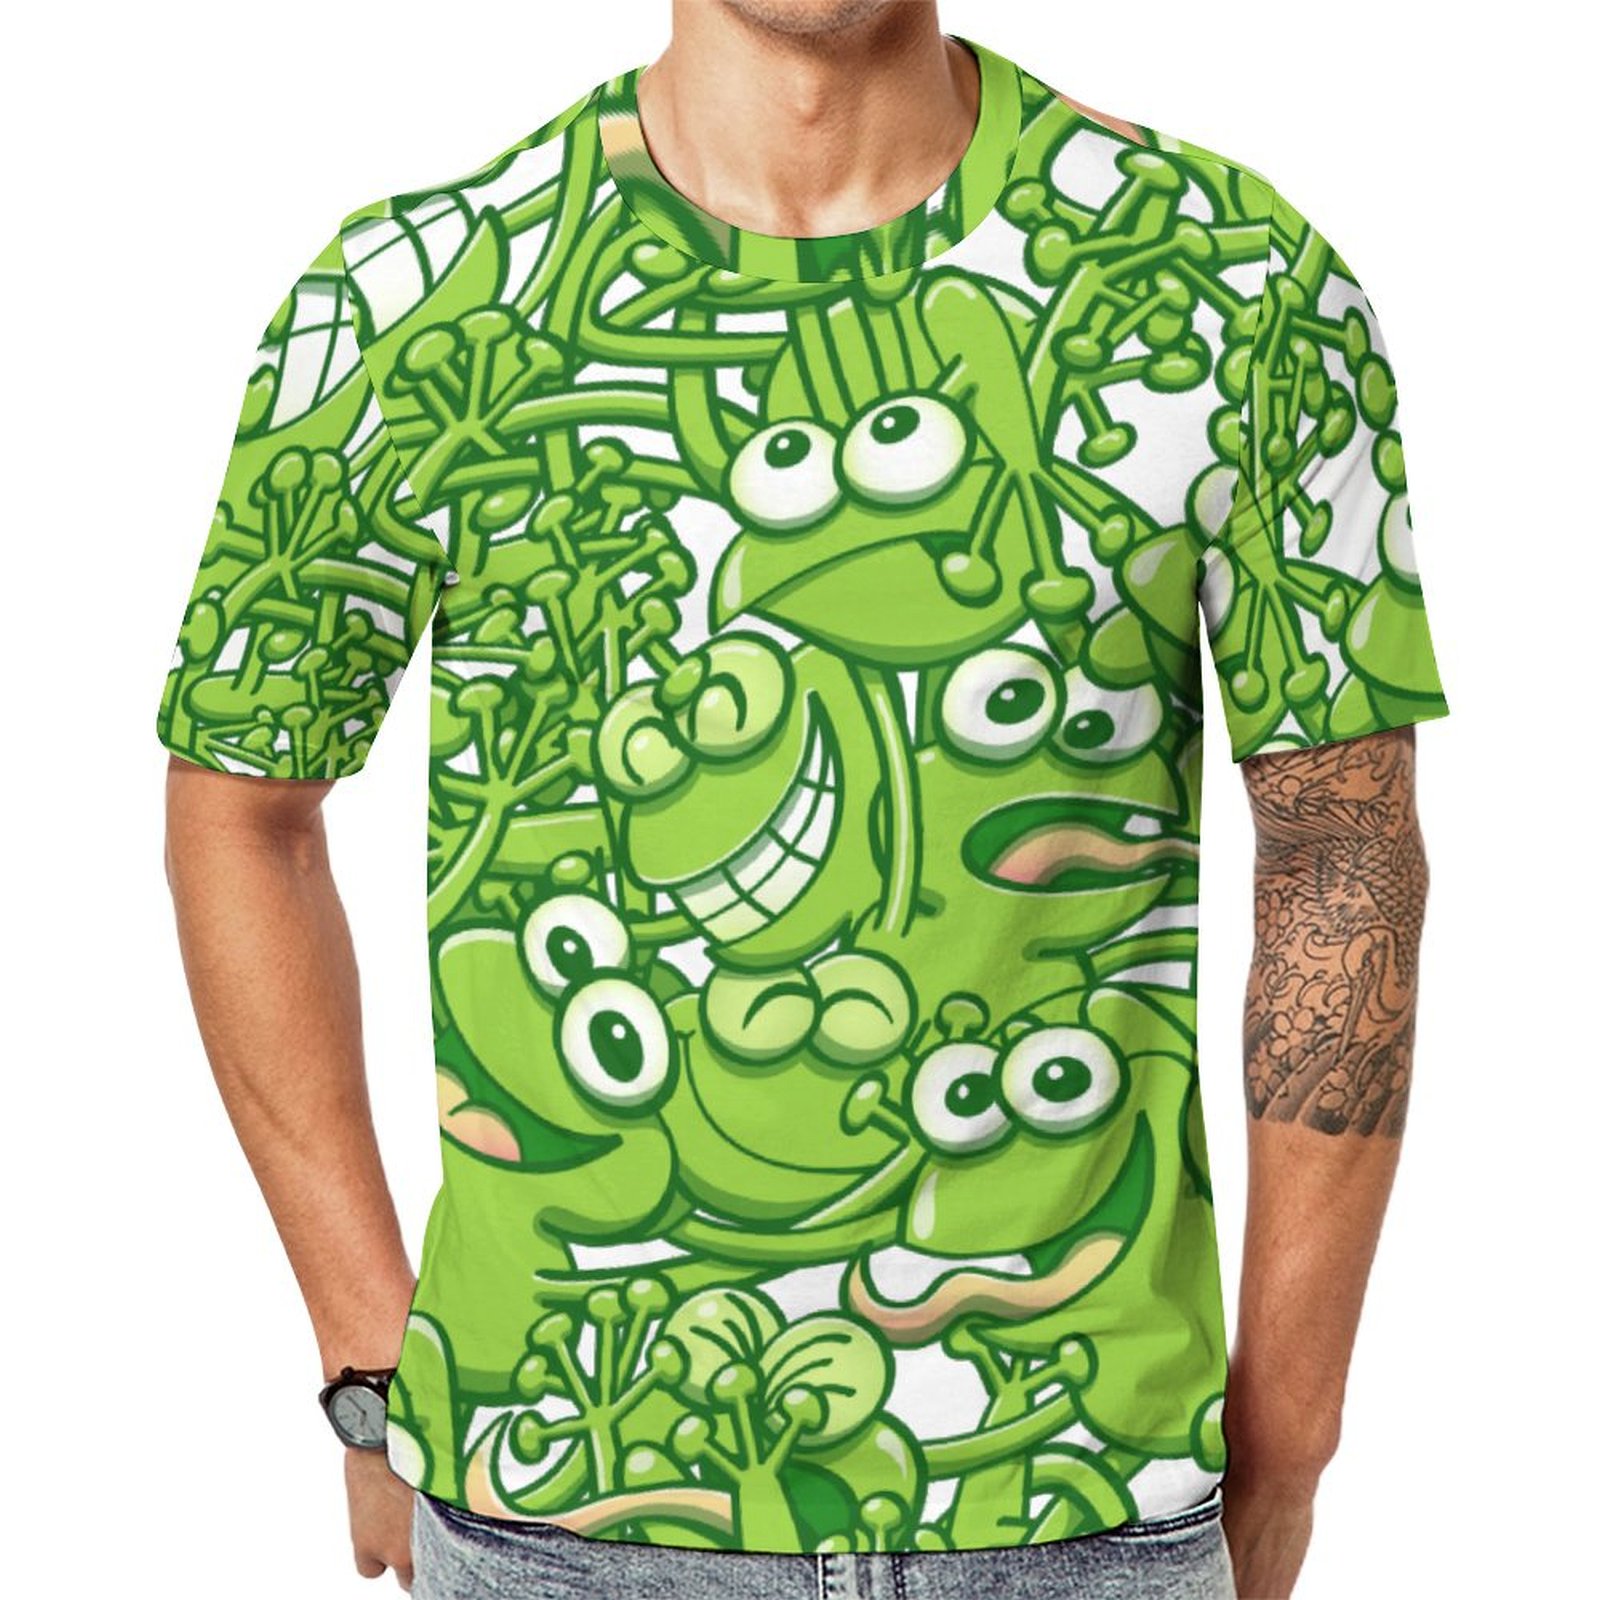 Green Frogs Entangled In A Messy Short Sleeve Print Unisex Tshirt Summer Casual Tees for Men and Women Coolcoshirts